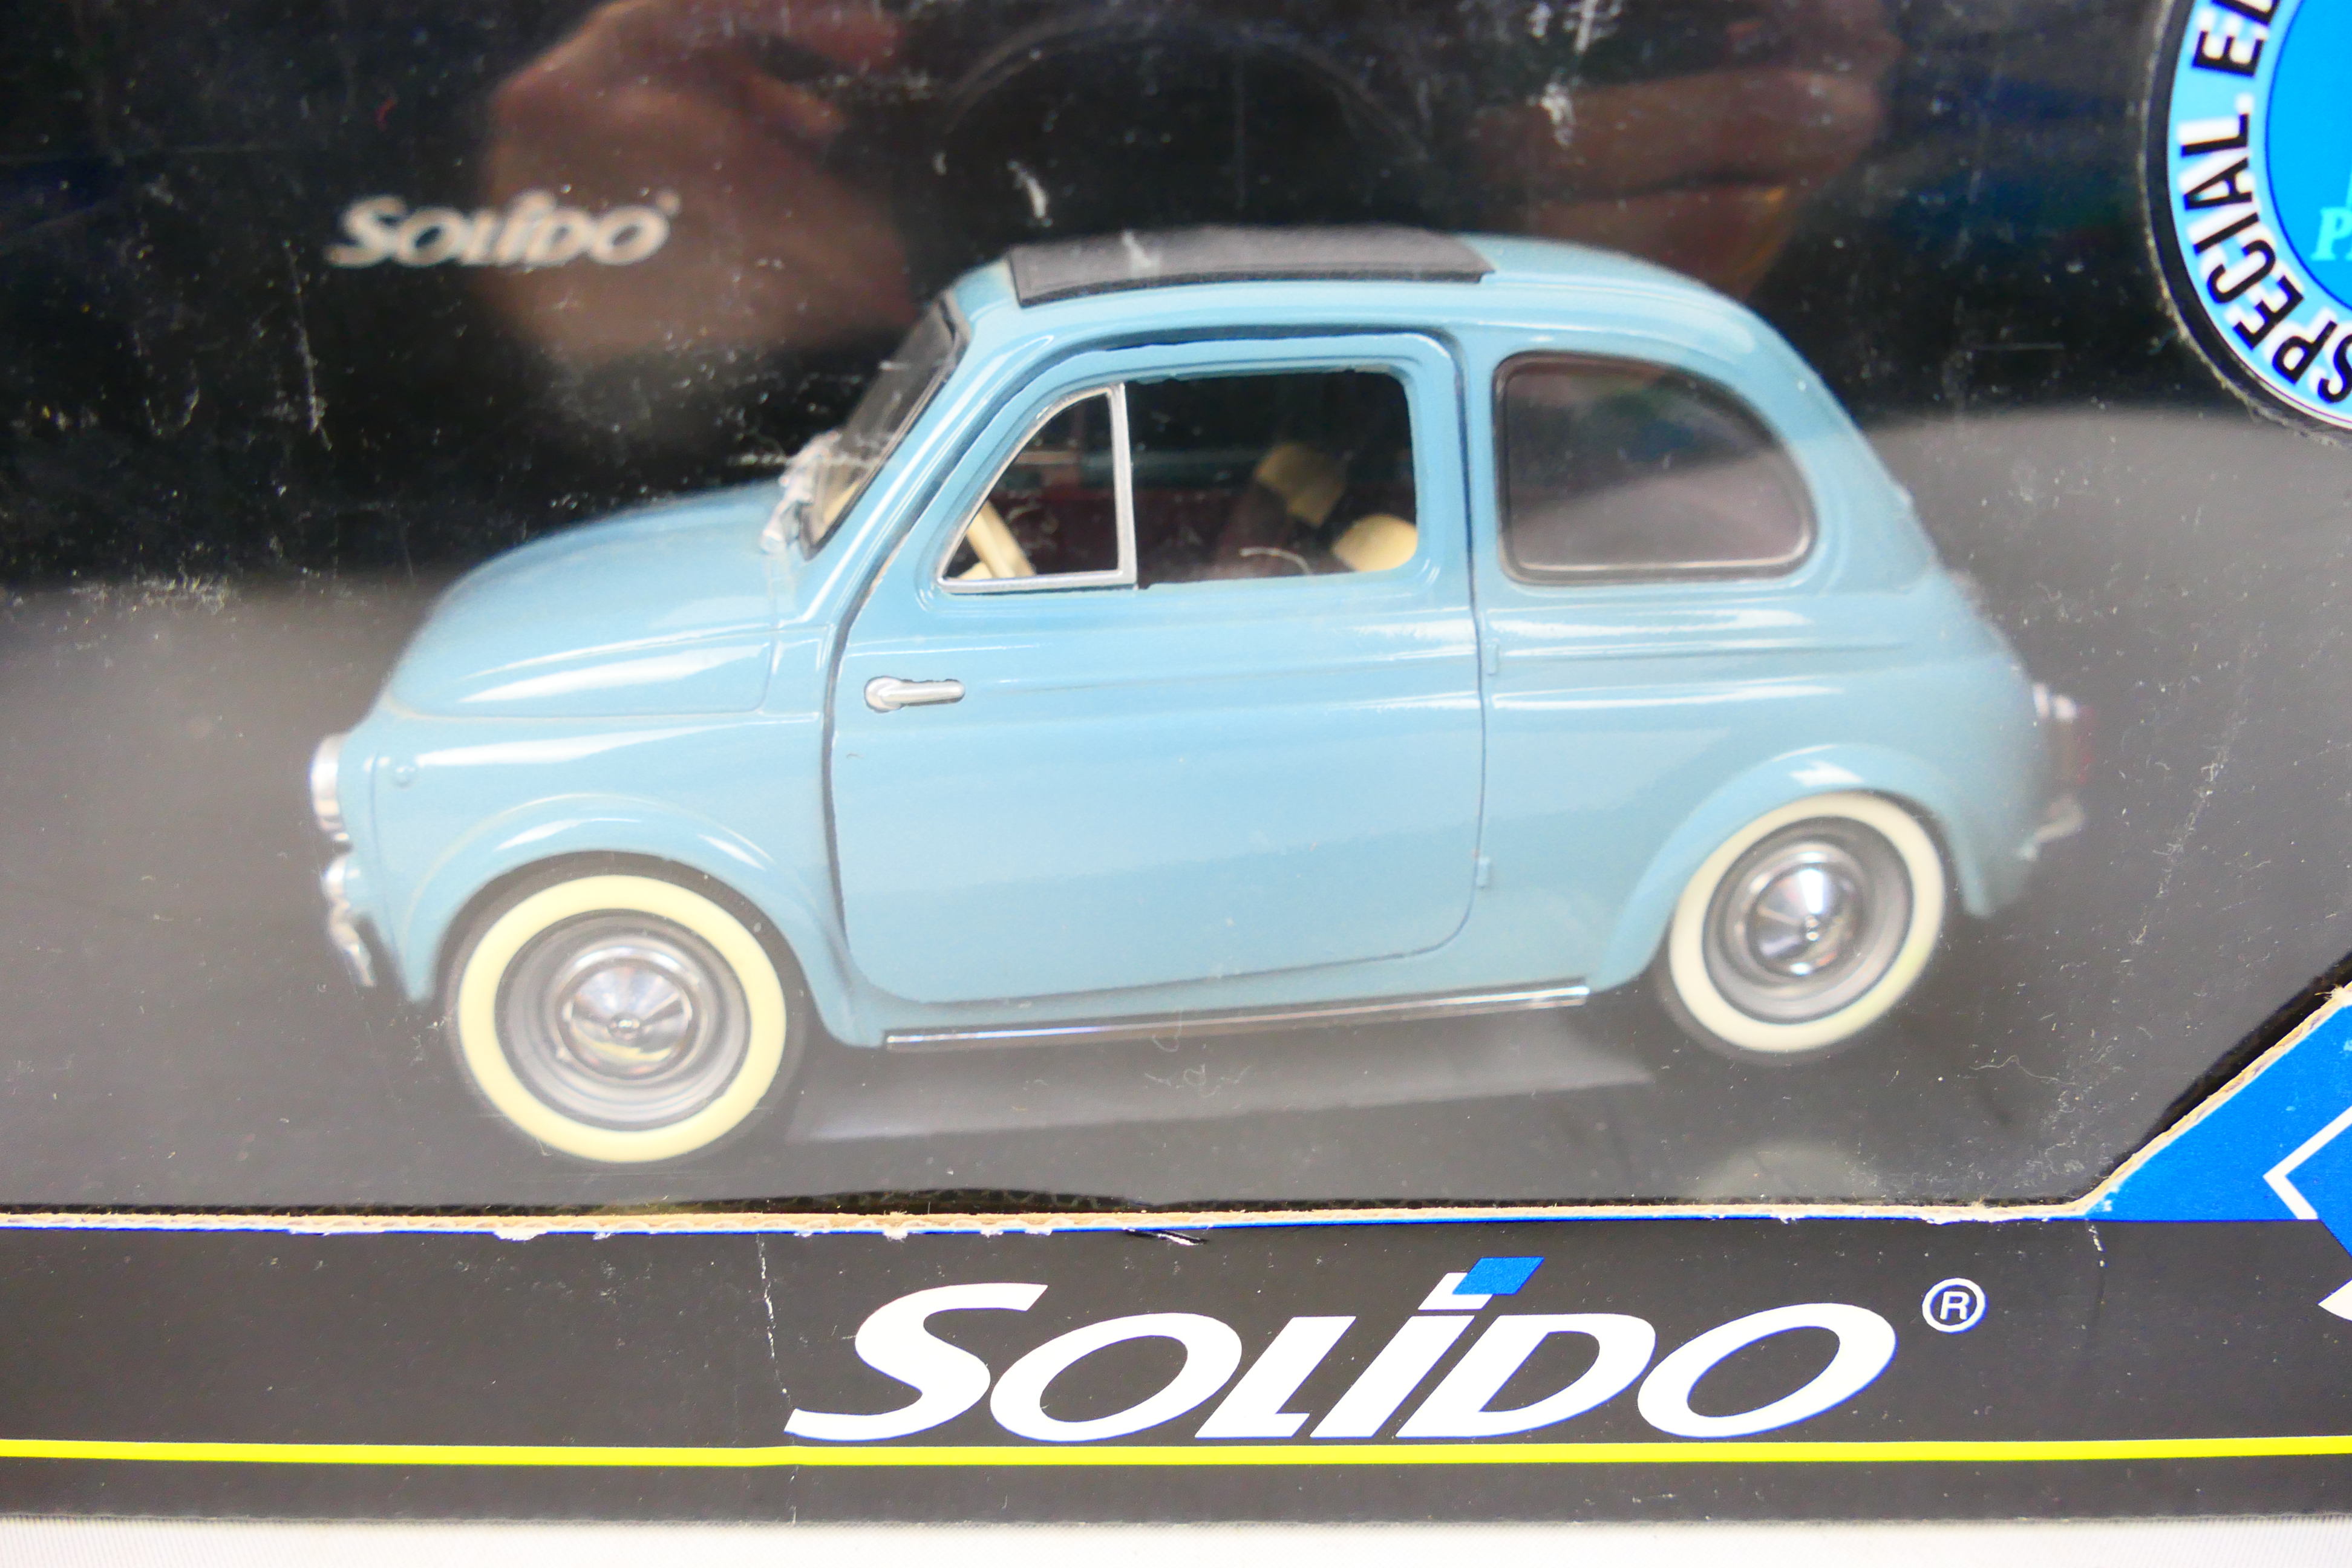 Bburago - Solido - Revell - Four boxed diecast 1:18 scale model cars. - Image 5 of 6